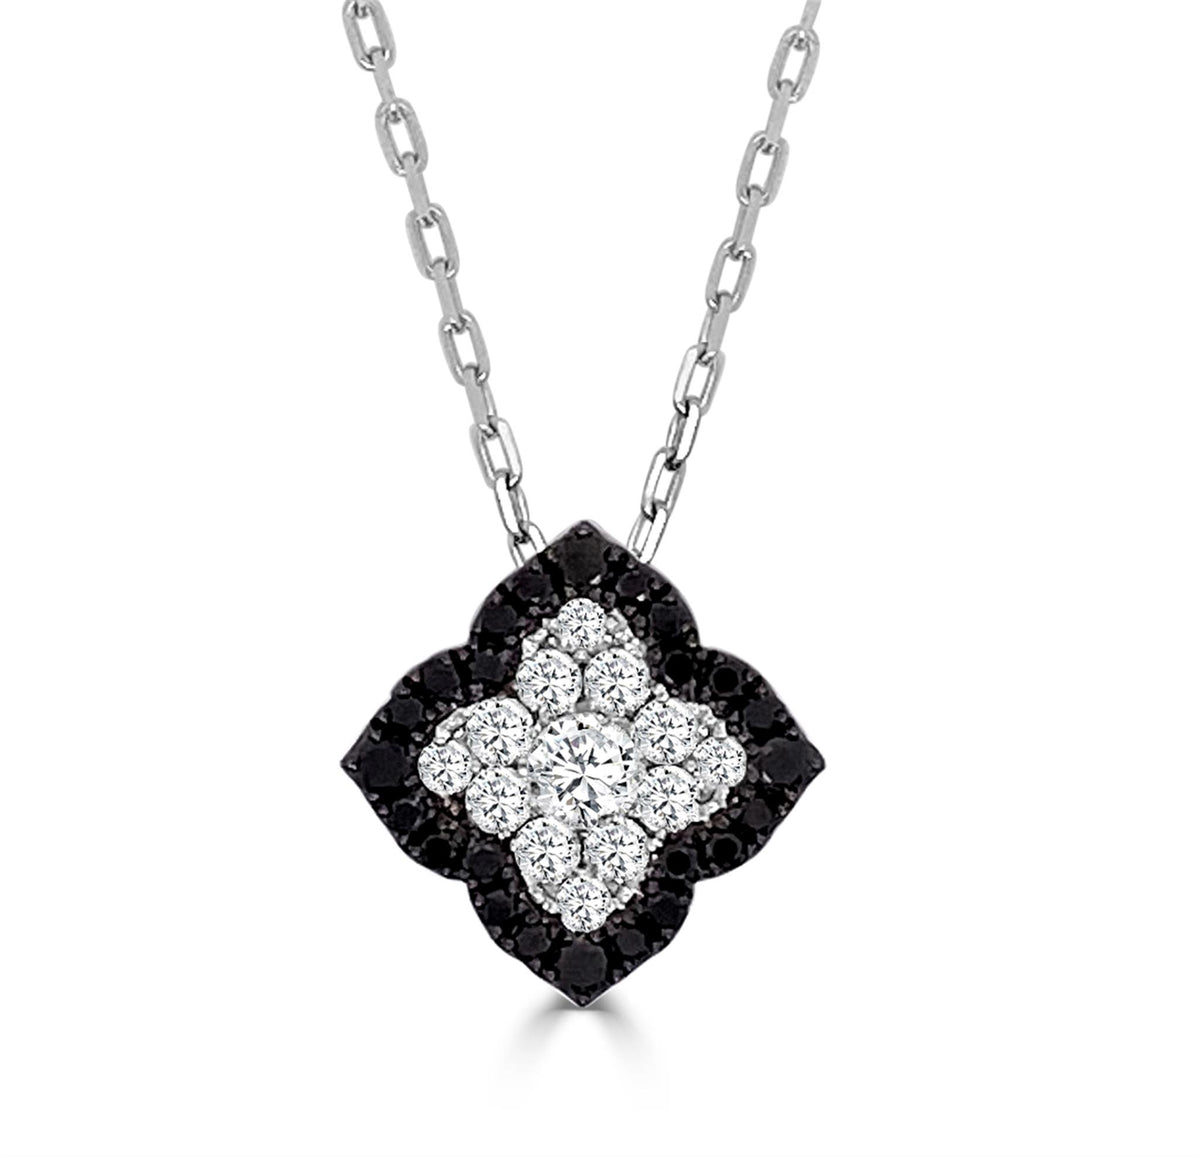 Frederic Sage 14Kt White Gold Black and White Pendant with 0.29cttw Natural Diamonds